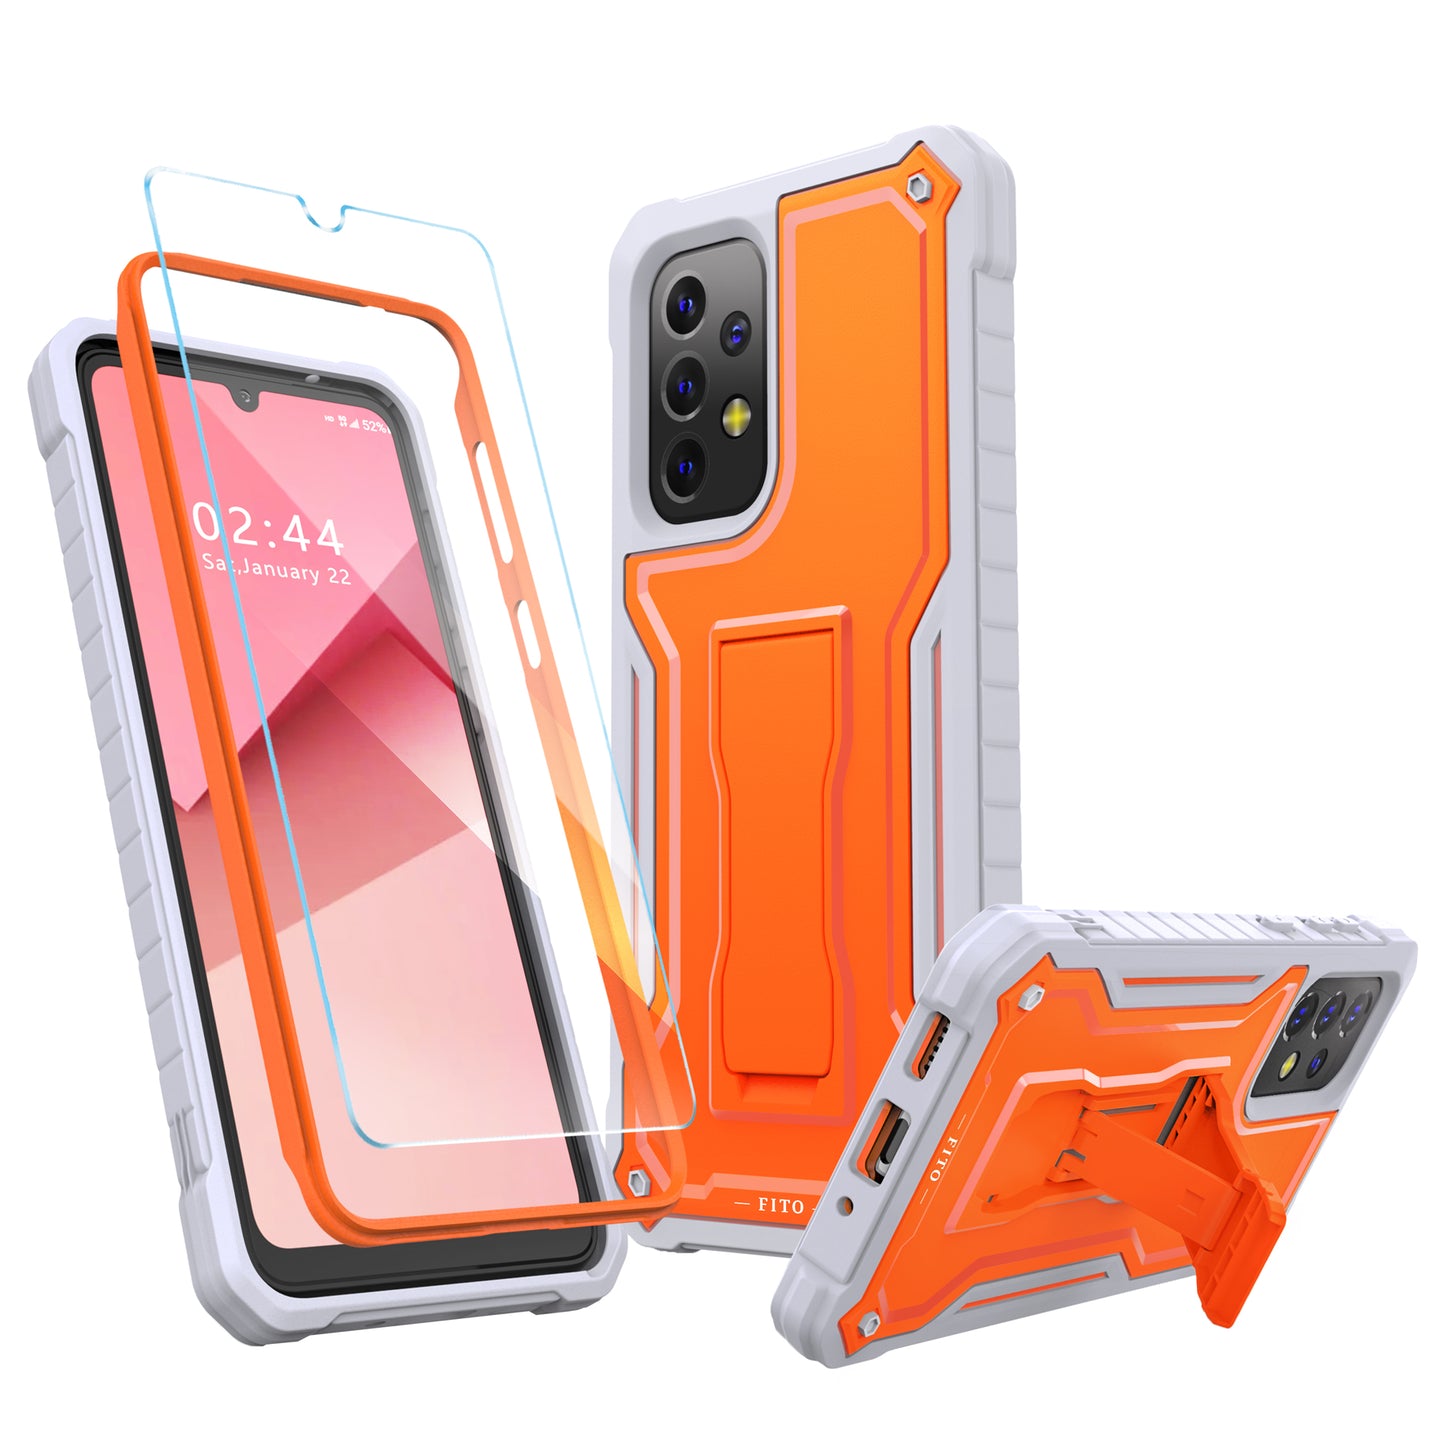 FITO for Samsung Galaxy A33 Case, Dual Layer Shockproof Heavy Duty Case for Samsung A33 5G Phone with Screen Protector, Built-in Kickstand